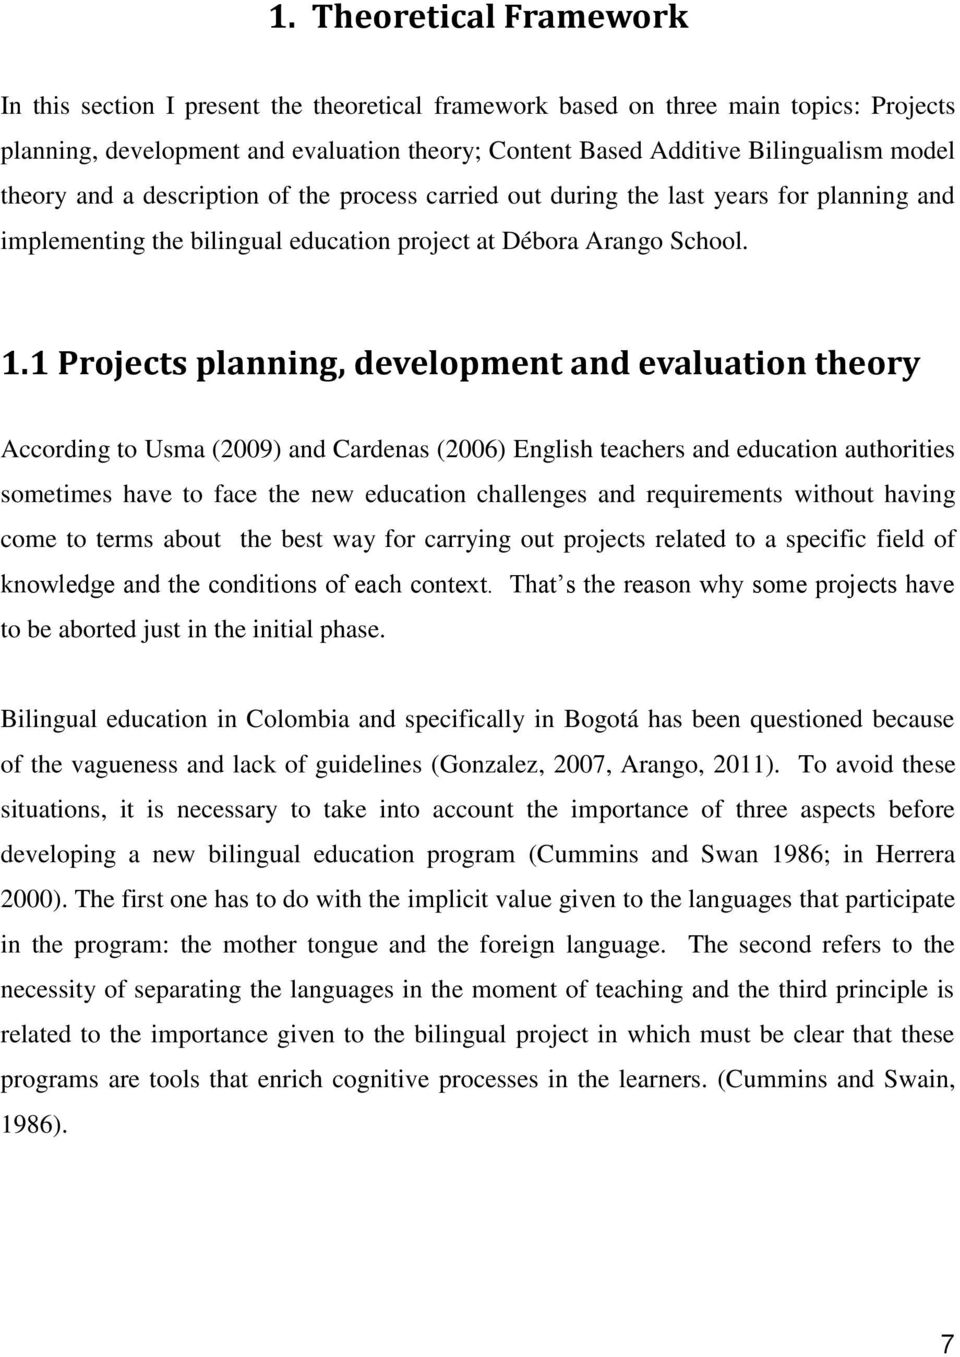 1 Projects planning, development and evaluation theory According to Usma (2009) and Cardenas (2006) English teachers and education authorities sometimes have to face the new education challenges and